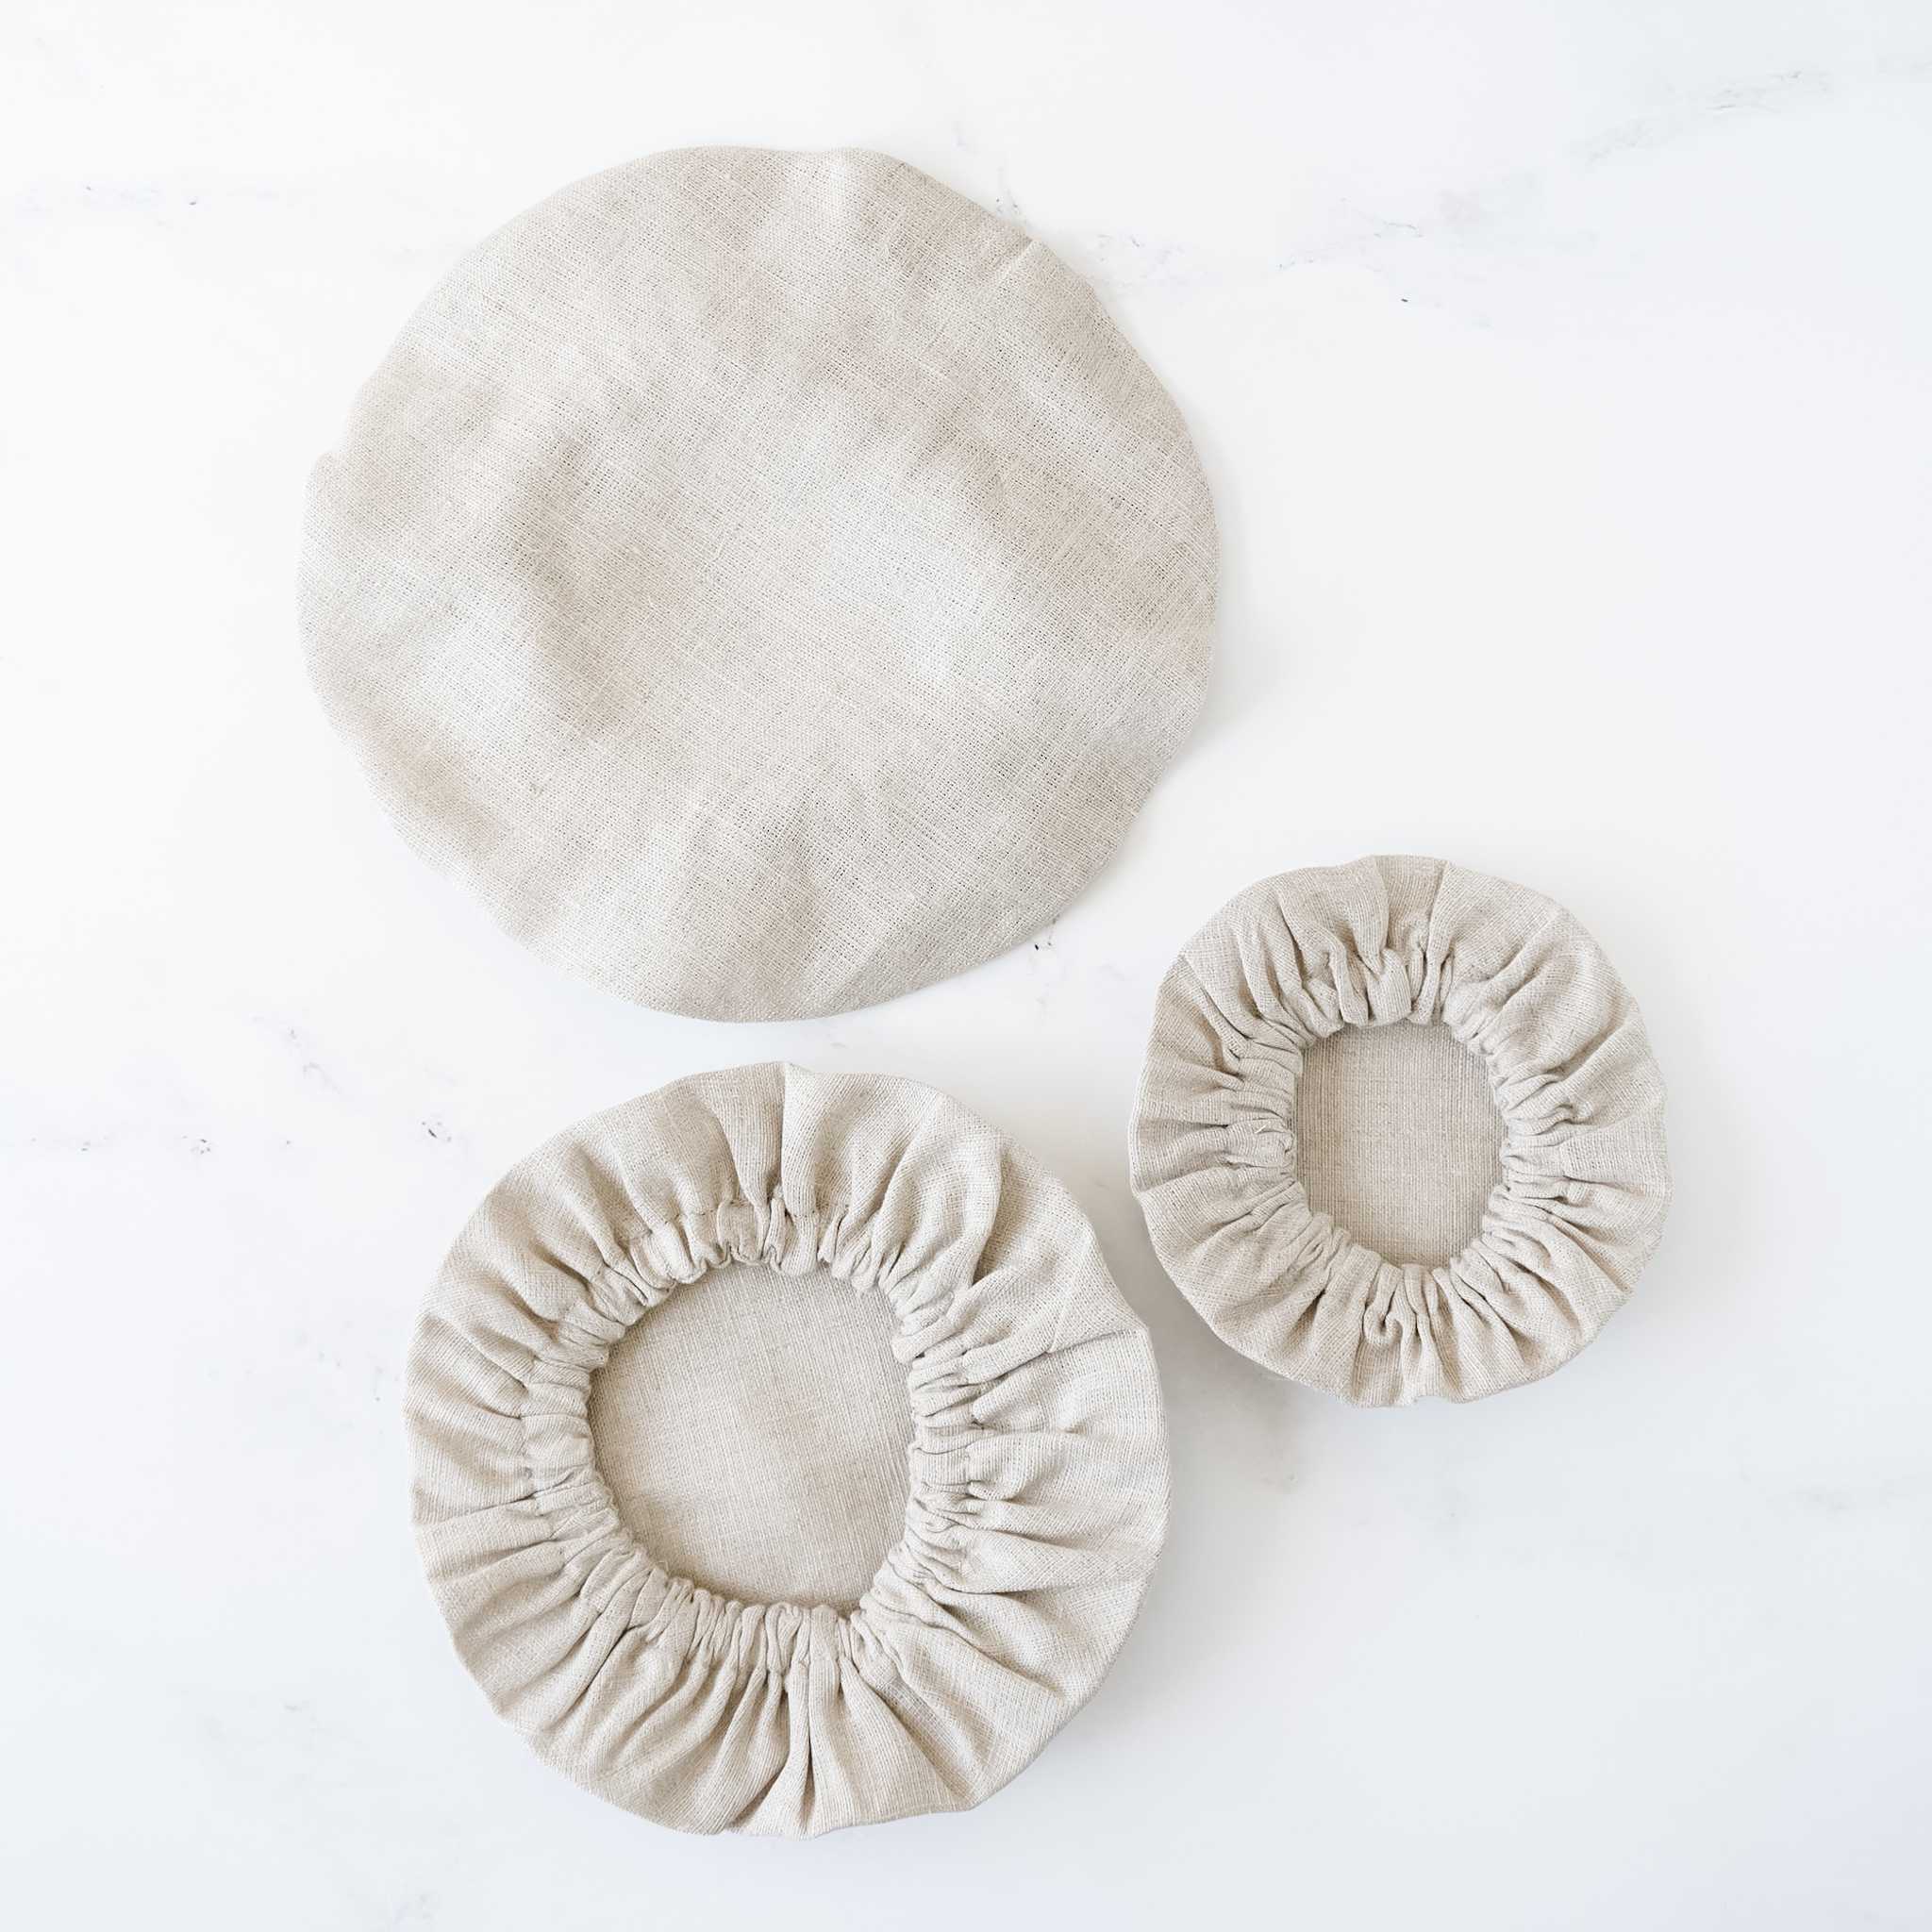 reusable dish covers in natural linen